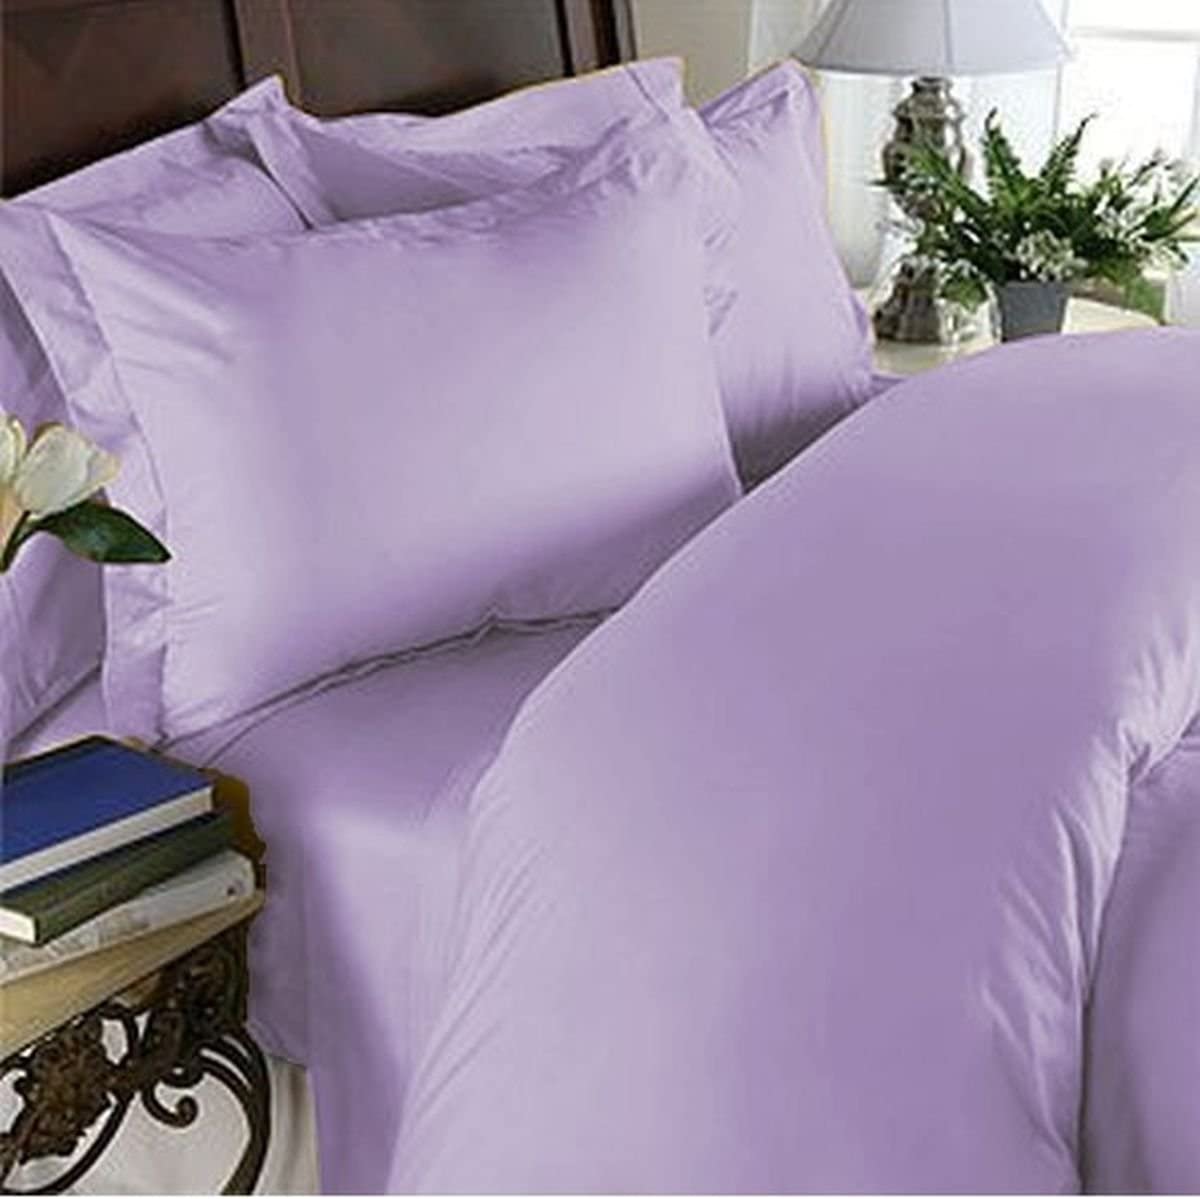 Buy Full Size Flat Sheet Lavender Egyptian Cotton 1000 Thread Count at- Egyptianhomelinens.com